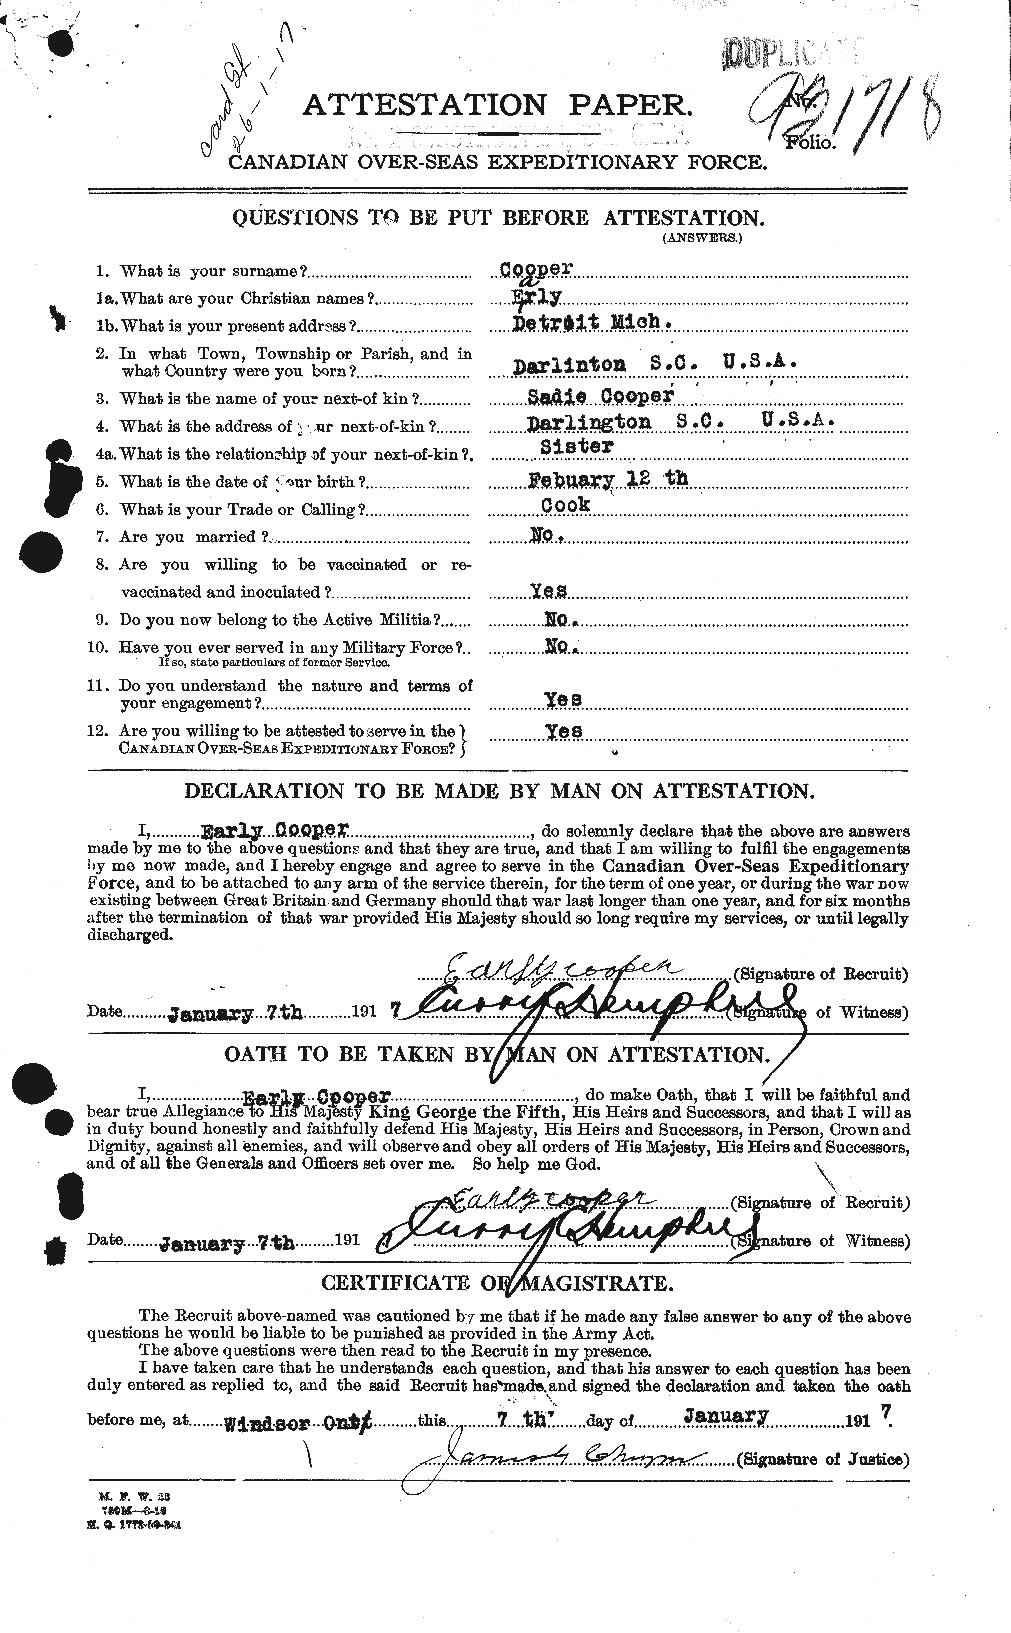 Personnel Records of the First World War - CEF 058516a